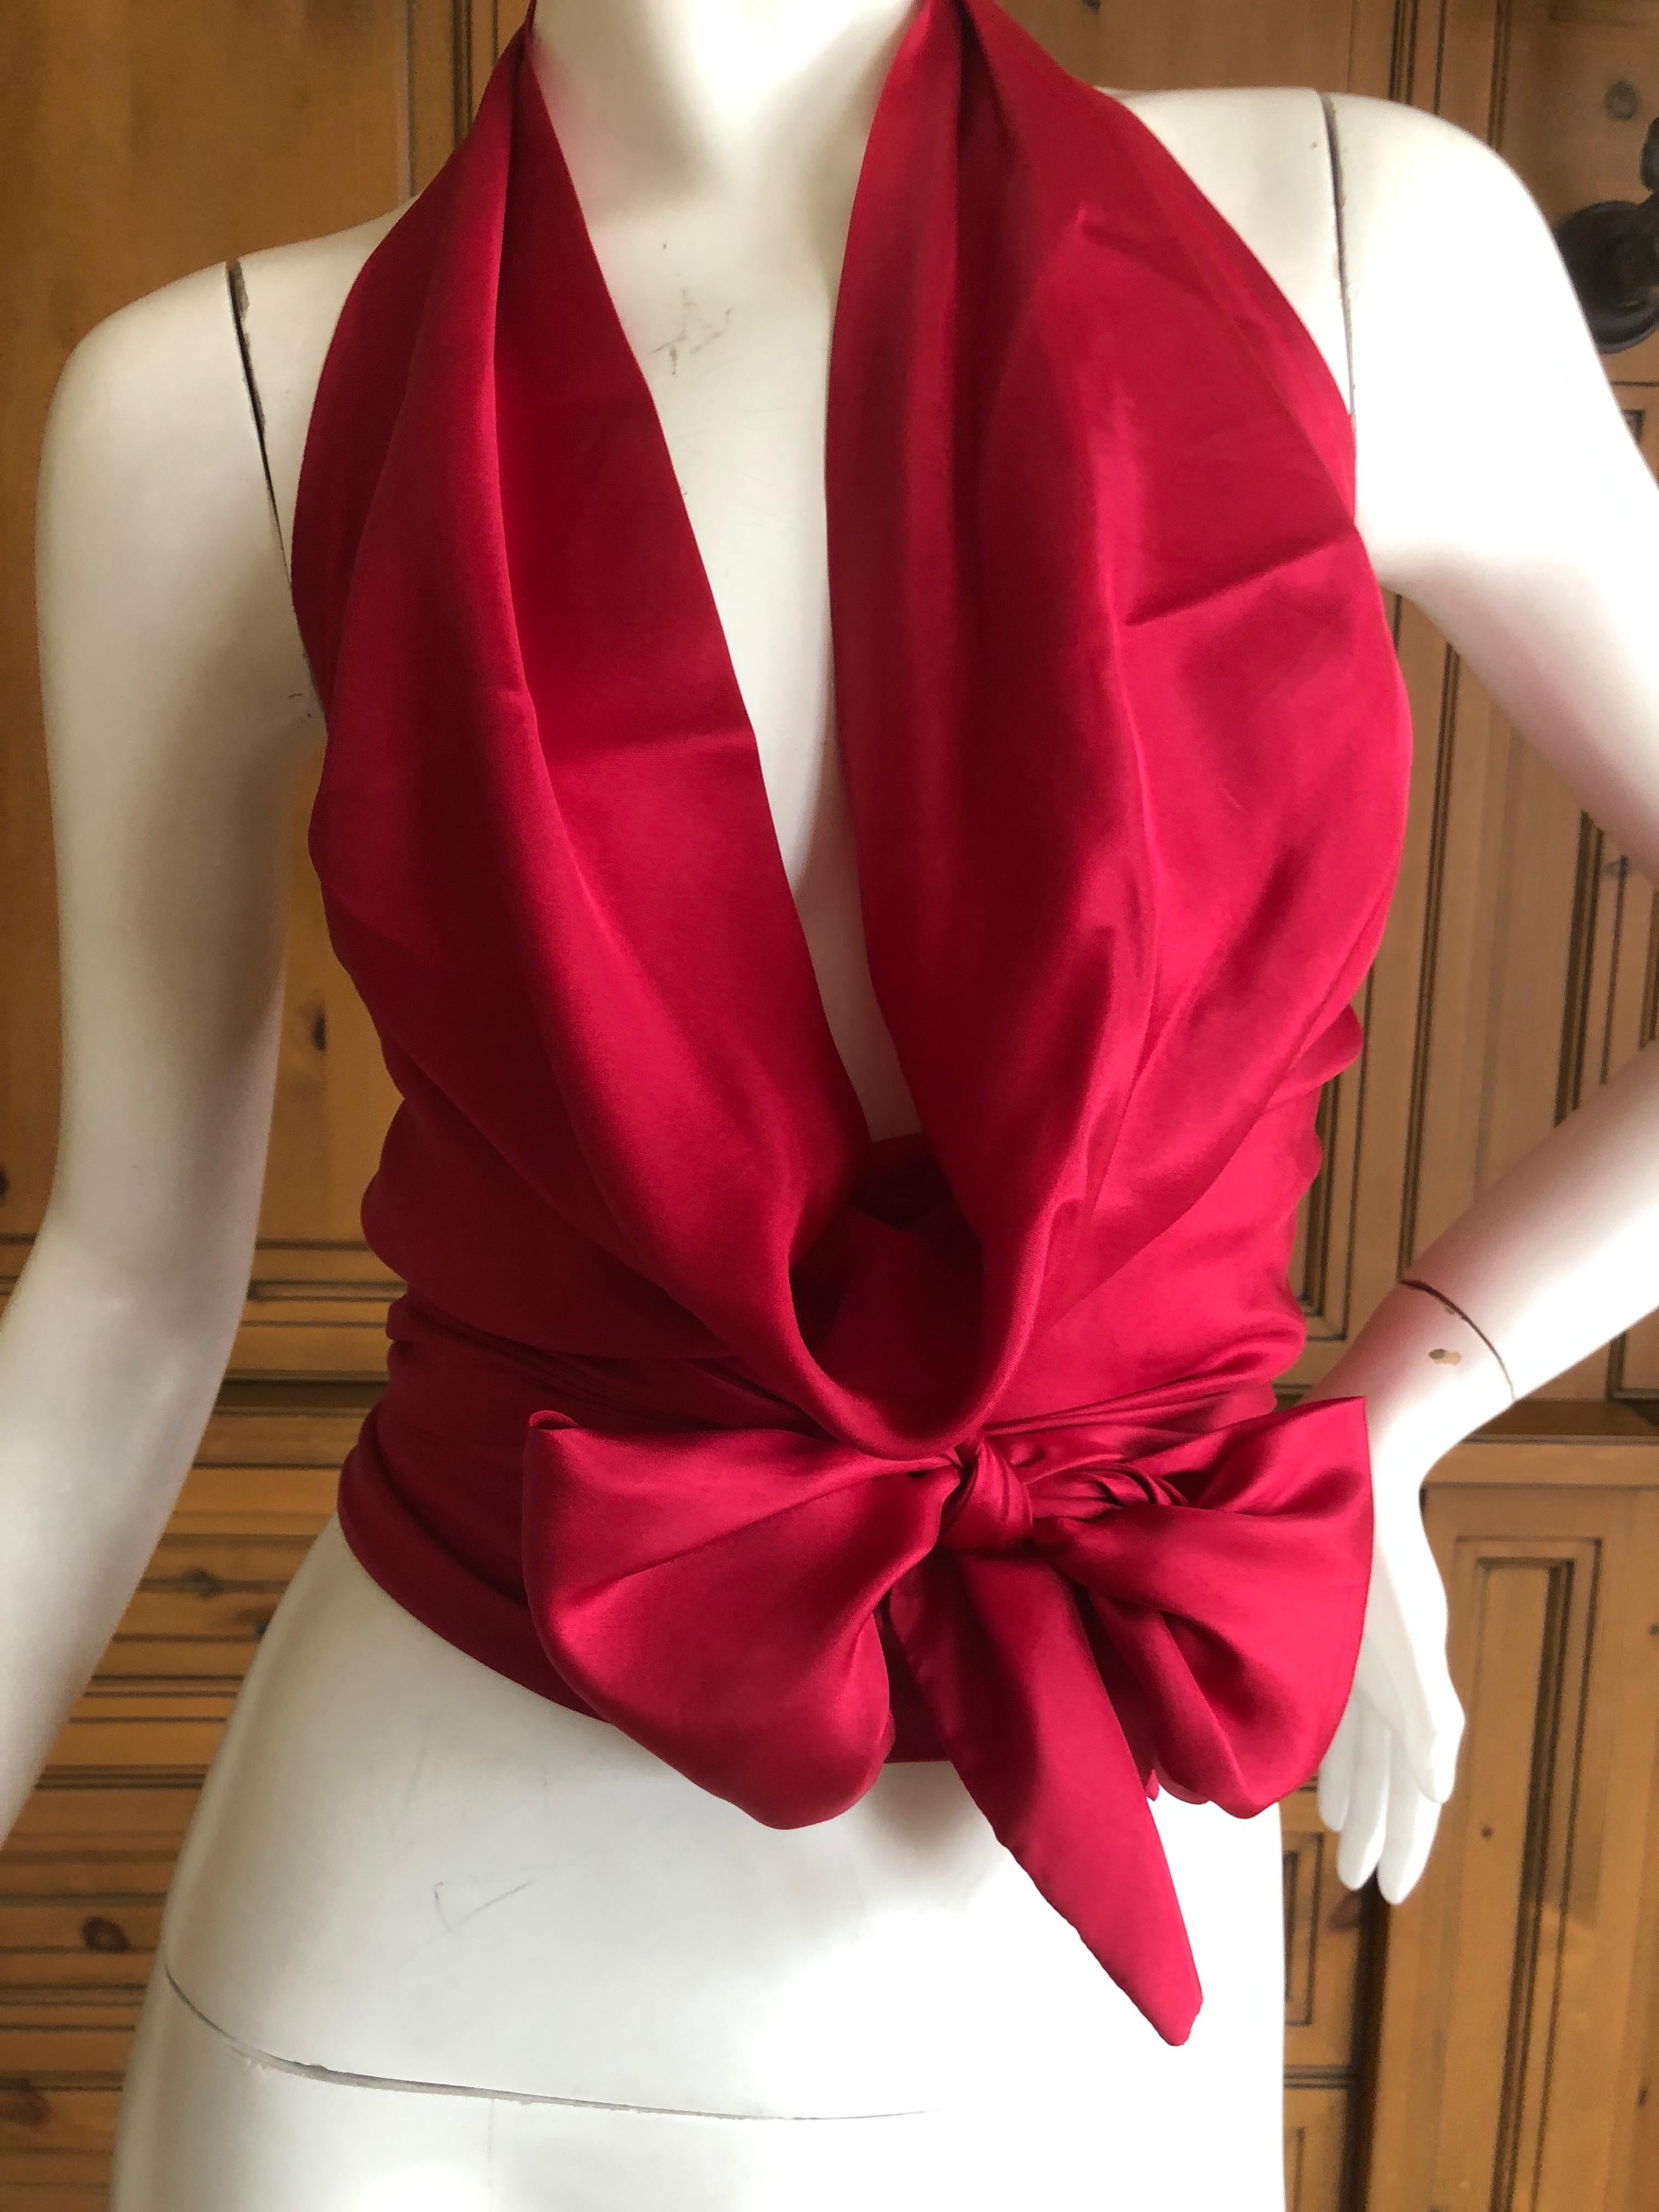 Cardinali Silk Wrap Style Halter Top  Fall 1973 In Excellent Condition For Sale In Cloverdale, CA